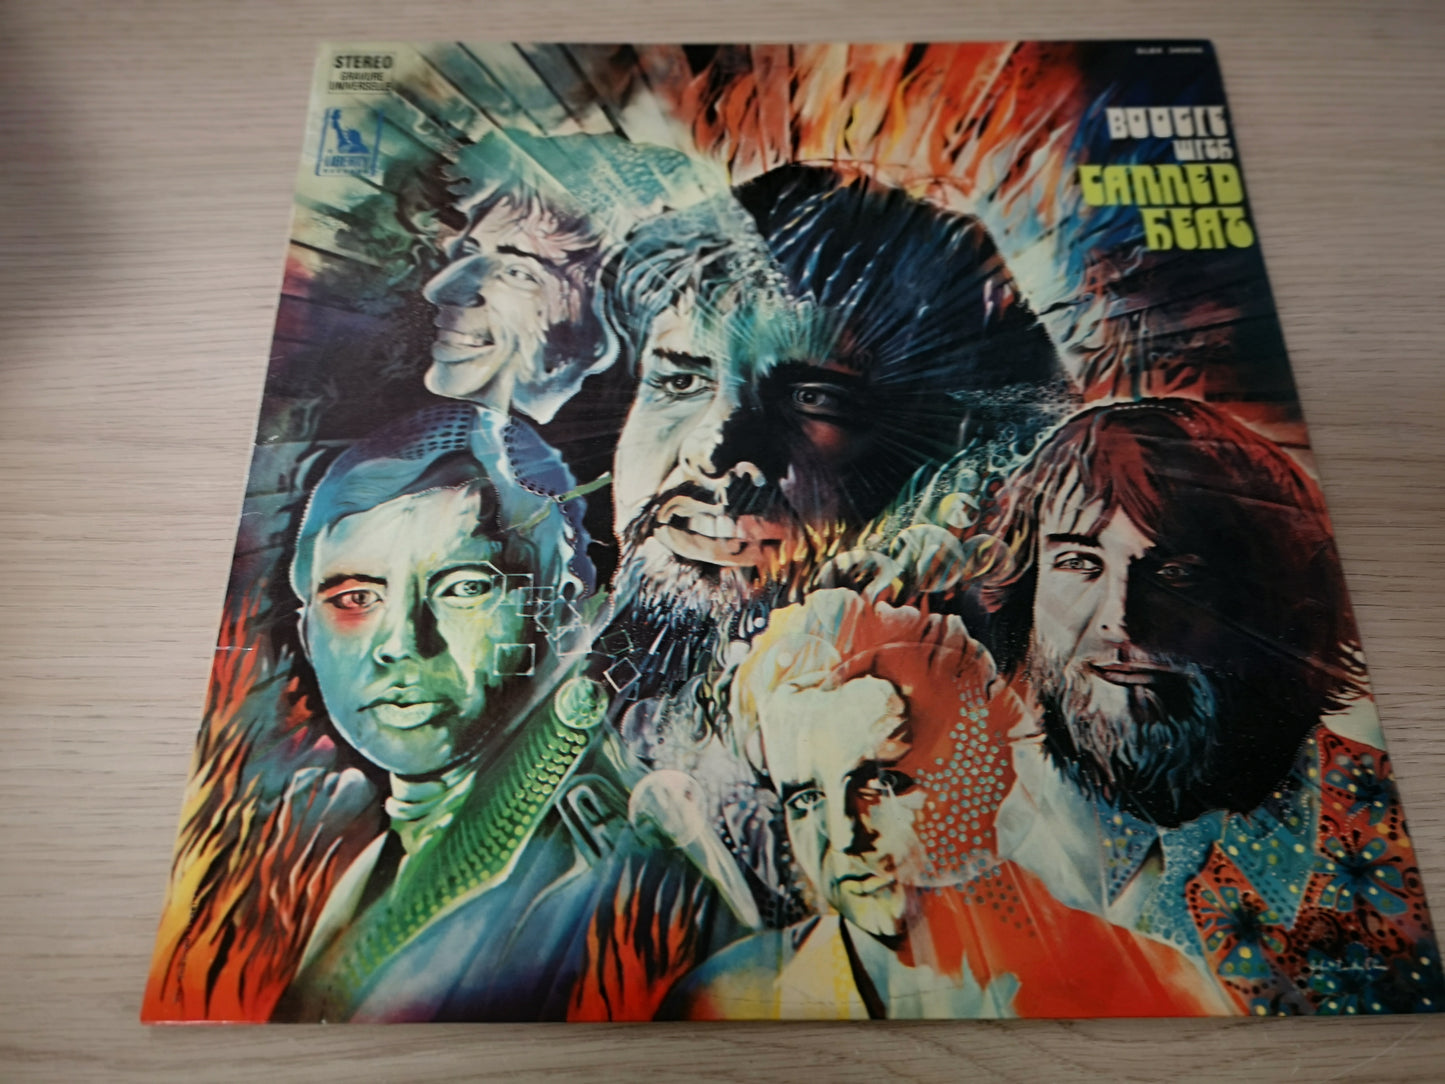 Canned Heat "Boogie With" Orig France 1968 M-/M-